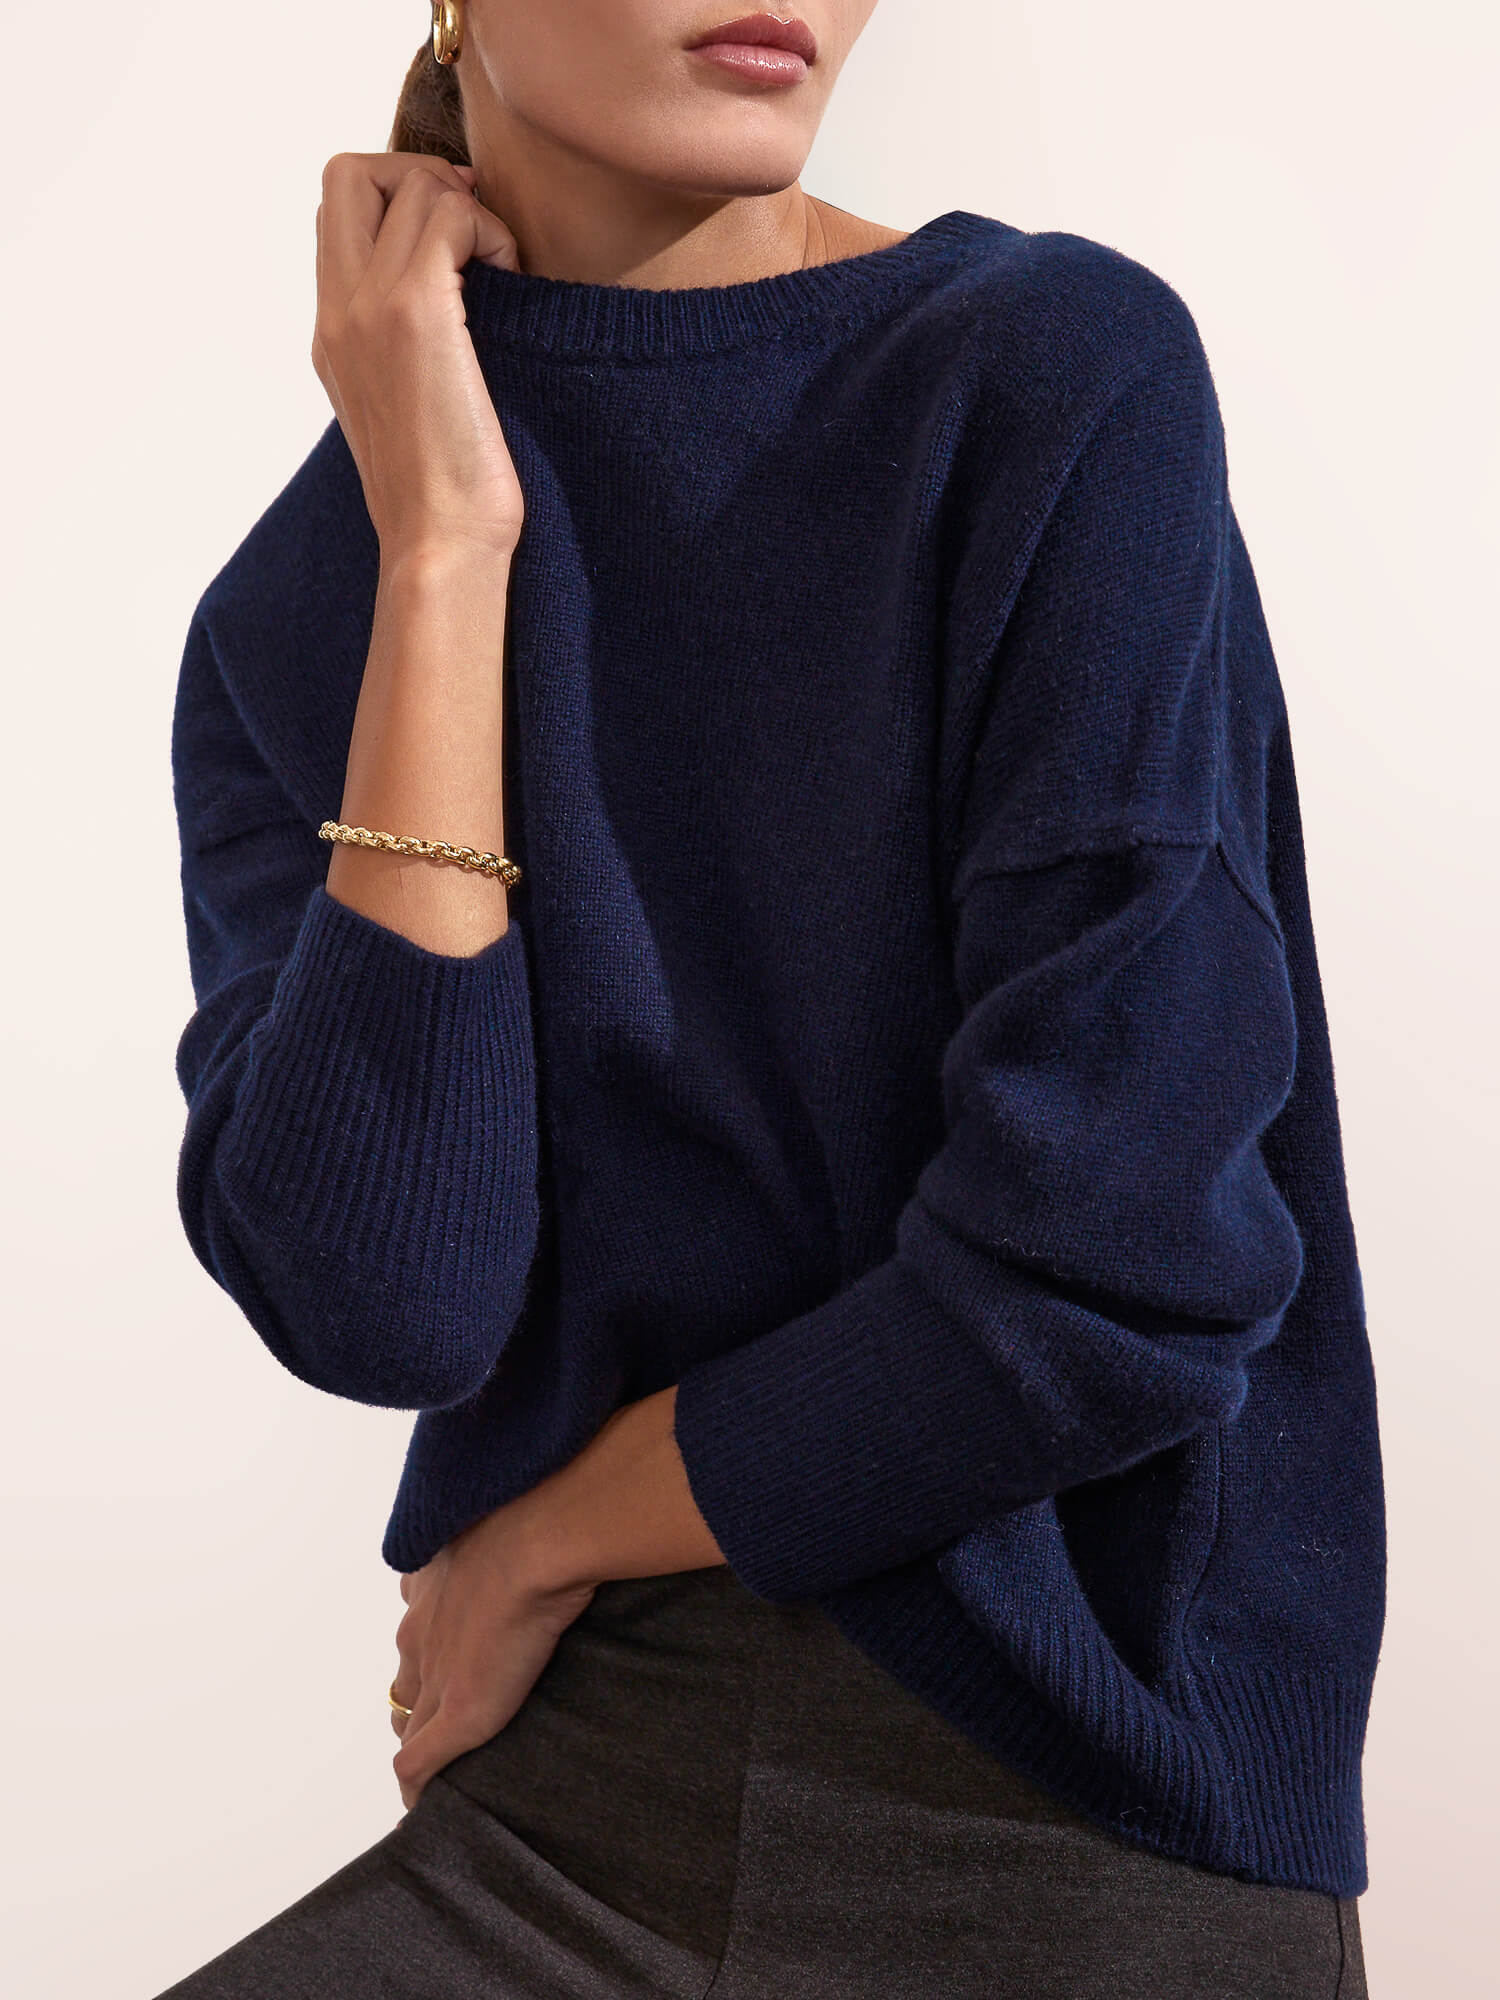 Everyday cashmere crewneck navy sweater front view